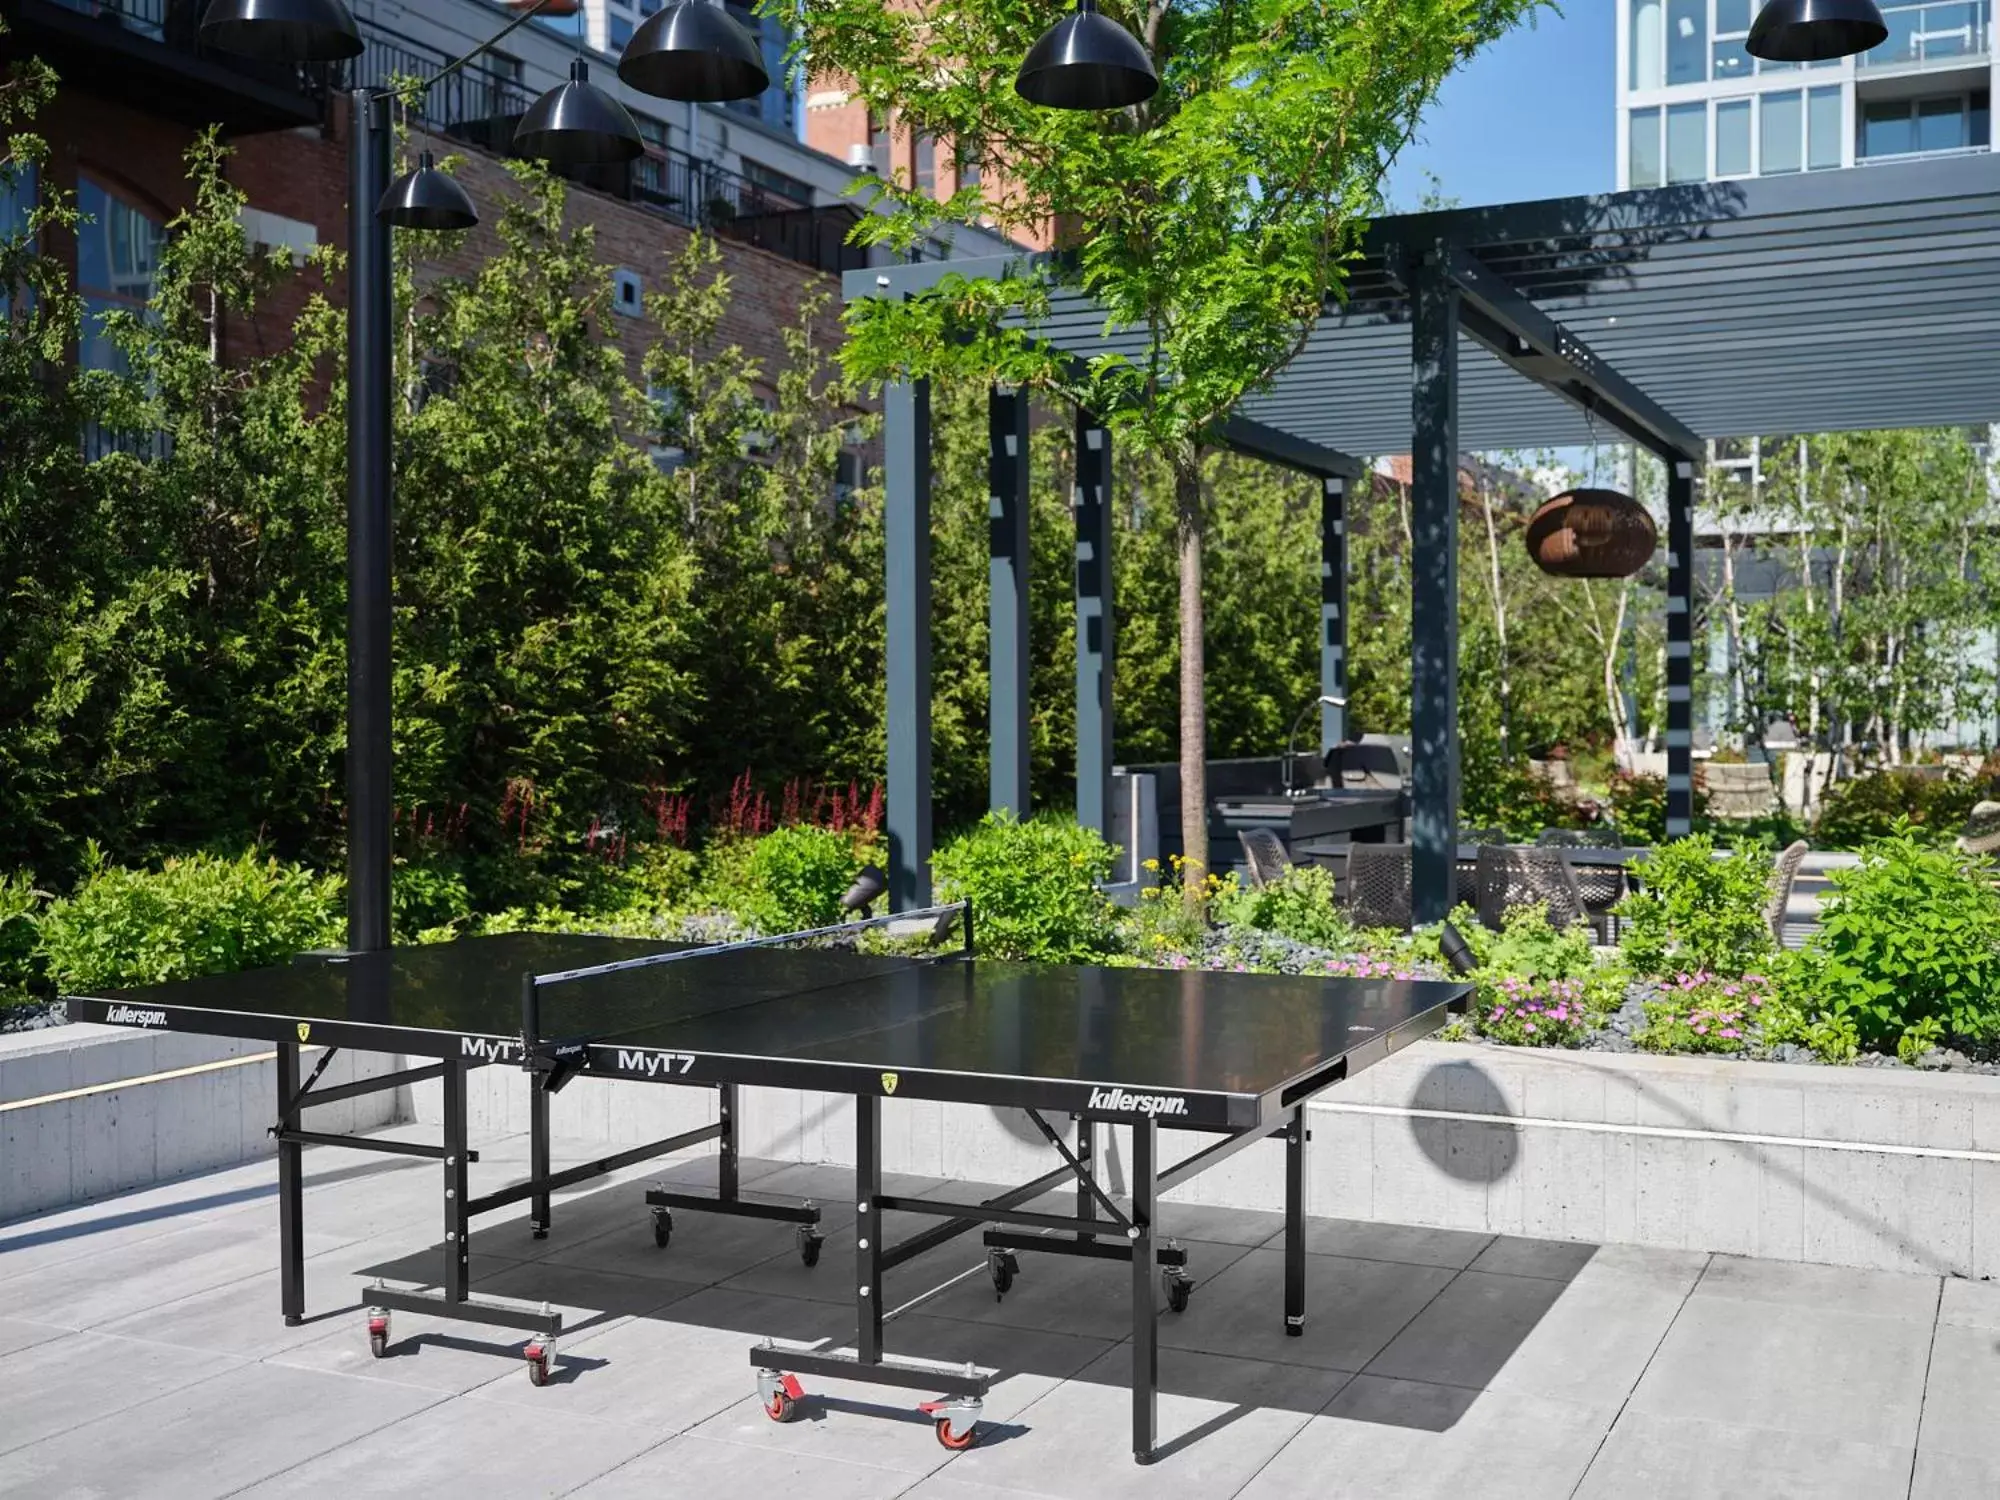 Table tennis in Level Chicago - River North